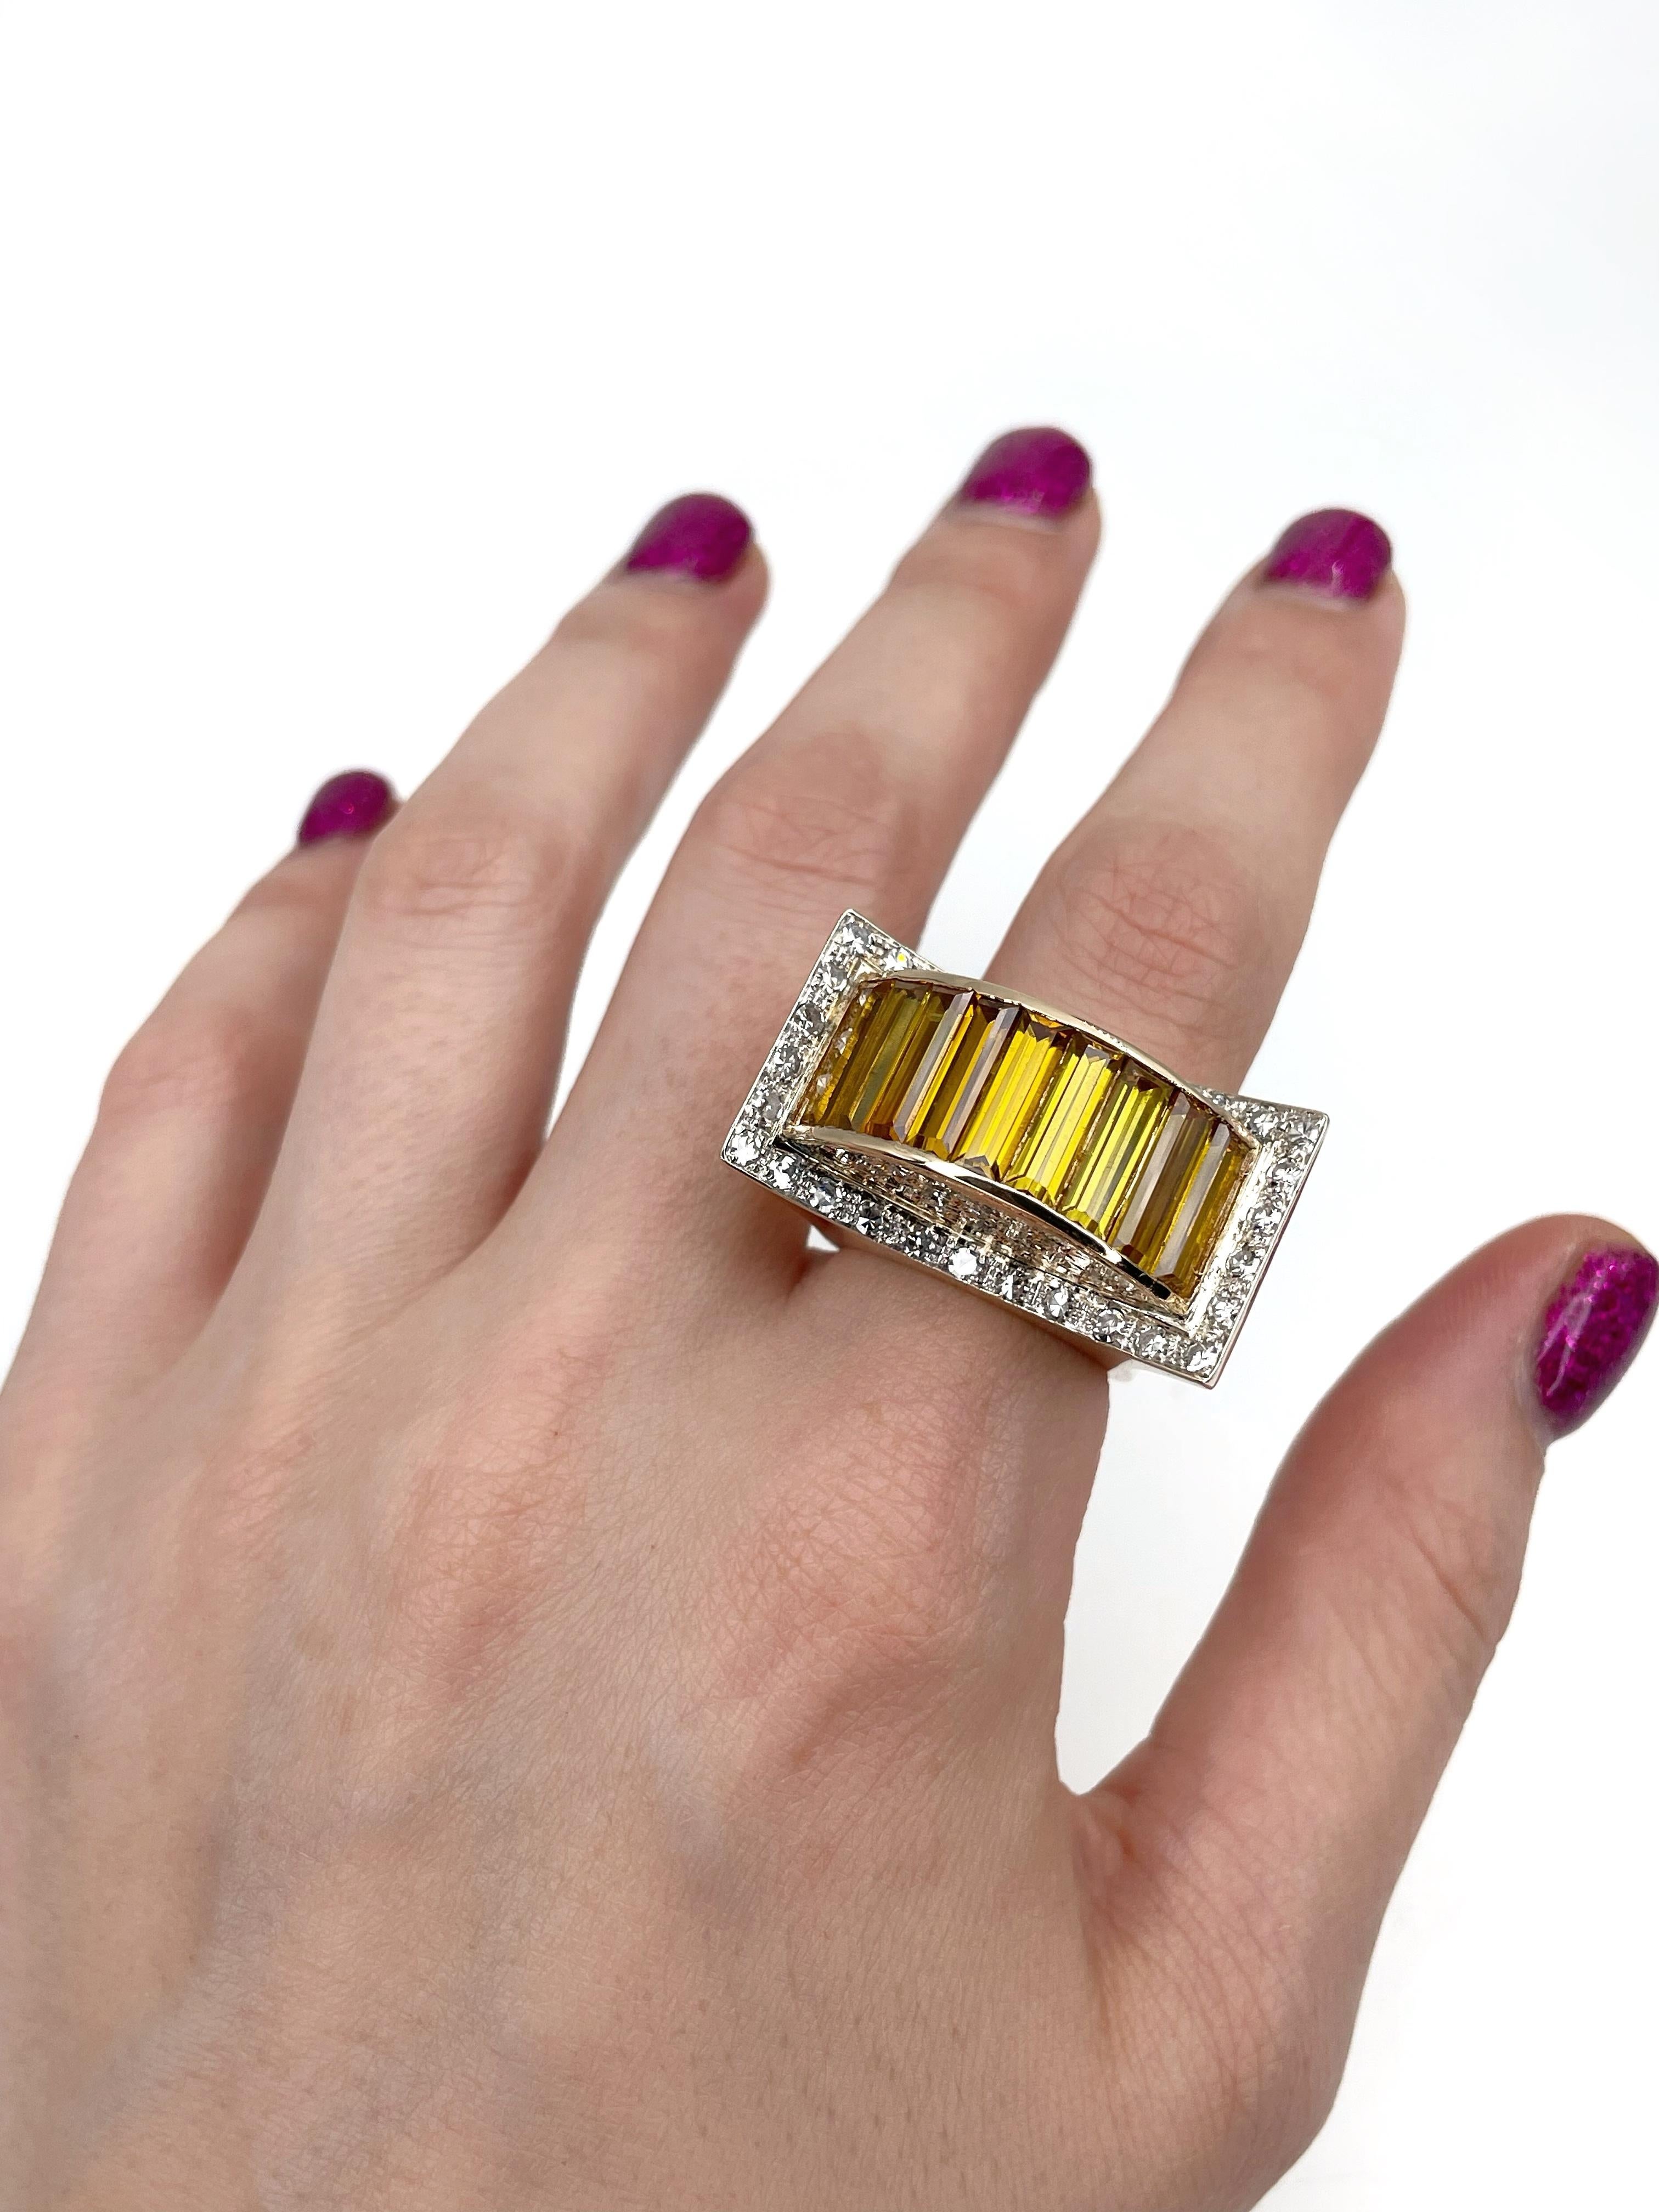 This is an adorable Art Deco cocktail ring crafted in 18K yellow gold. The piece features 9 rectangular step cut synthetic yellow sapphires (TW 6.00ct). There are 44 round cut diamonds: 1.40ct, RW-W, VS-SI. It is adorned with stars motif at the